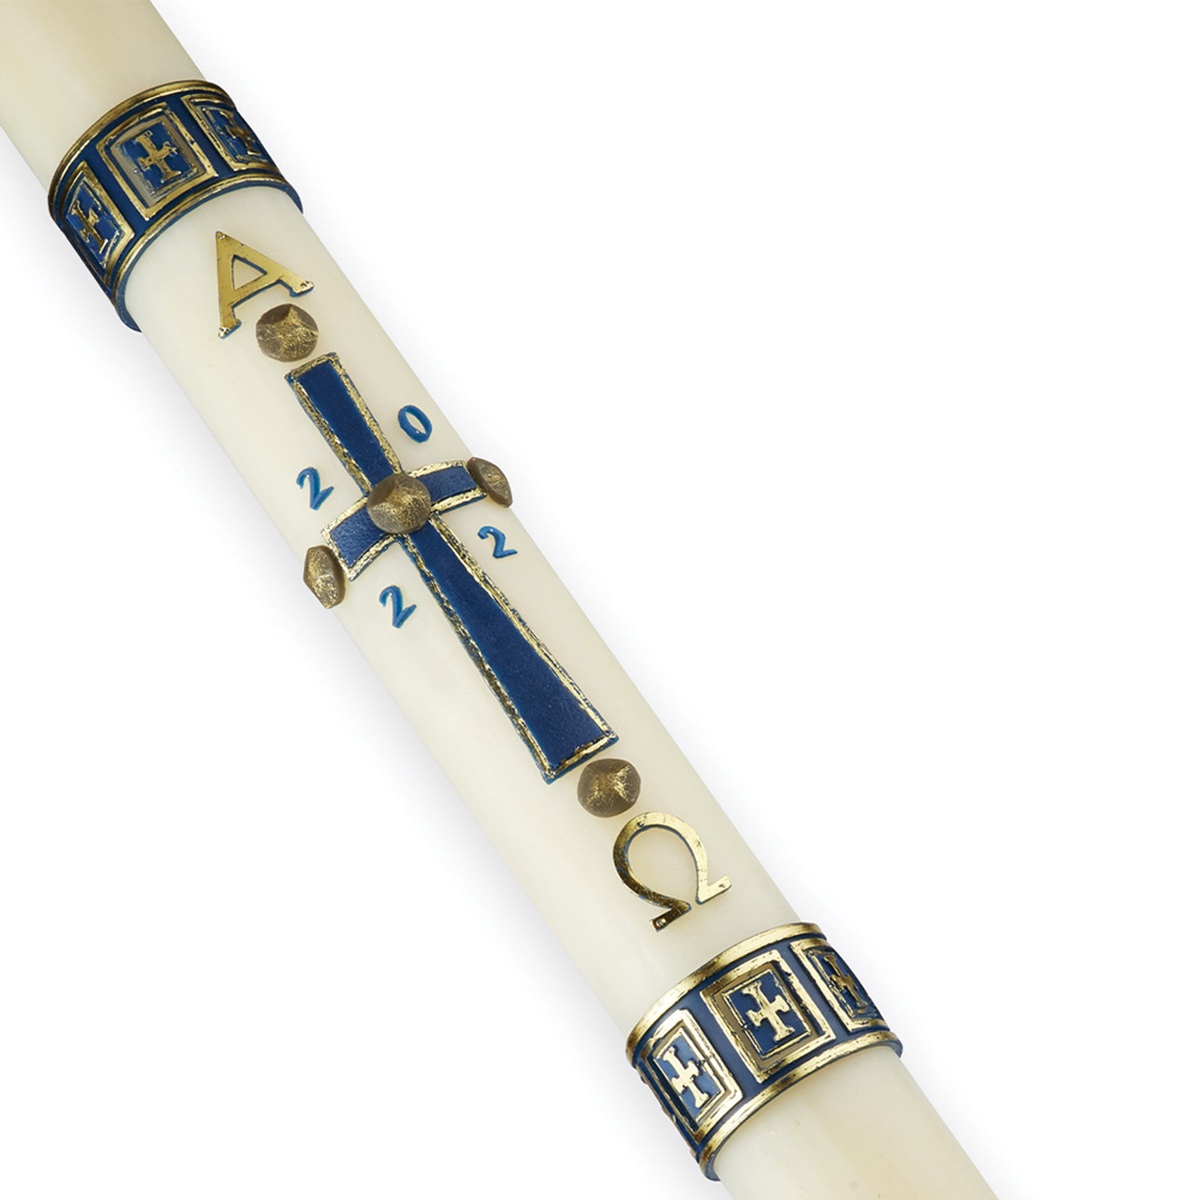 Root Paschal Candle Proclaim the Gospel 3” x 48”